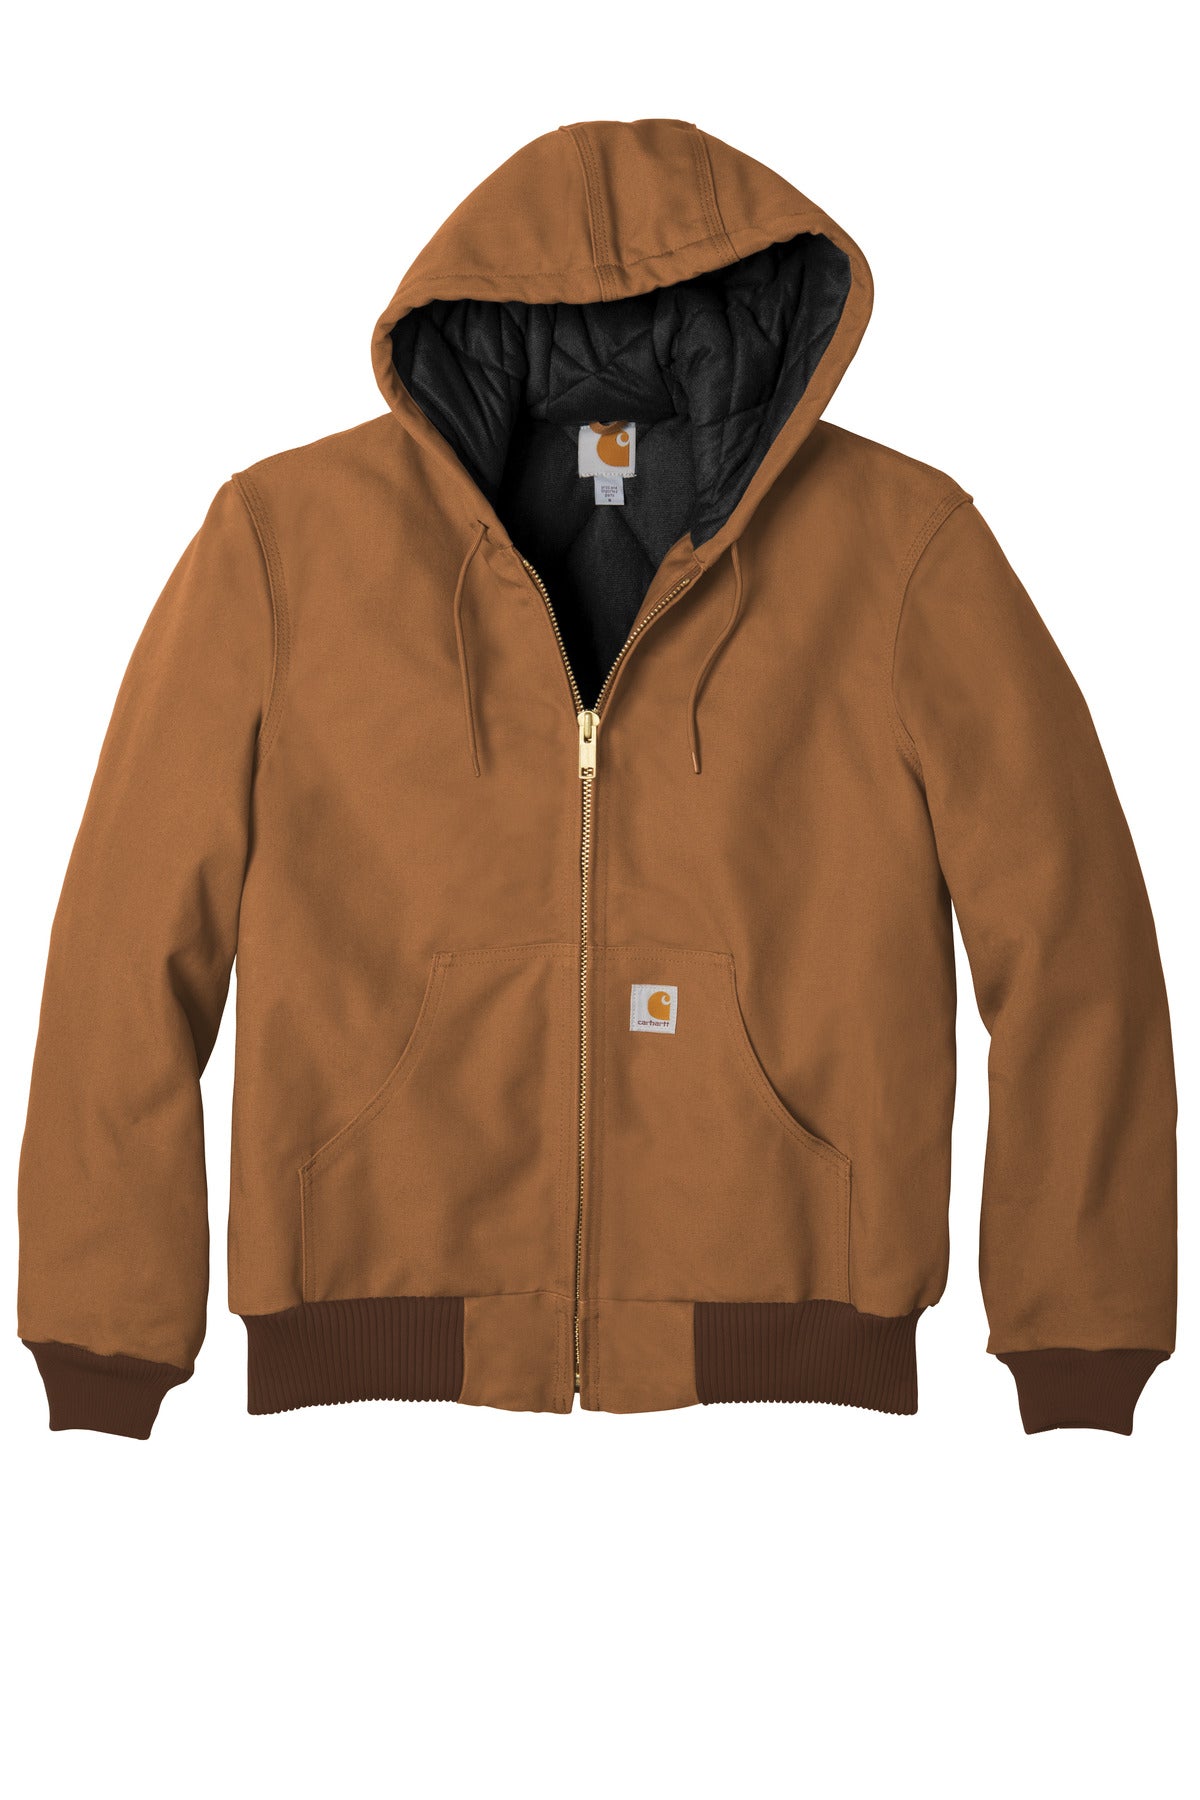 Carhartt Tall Quilted-Flannel-Lined Duck Active Jac. CTTSJ140